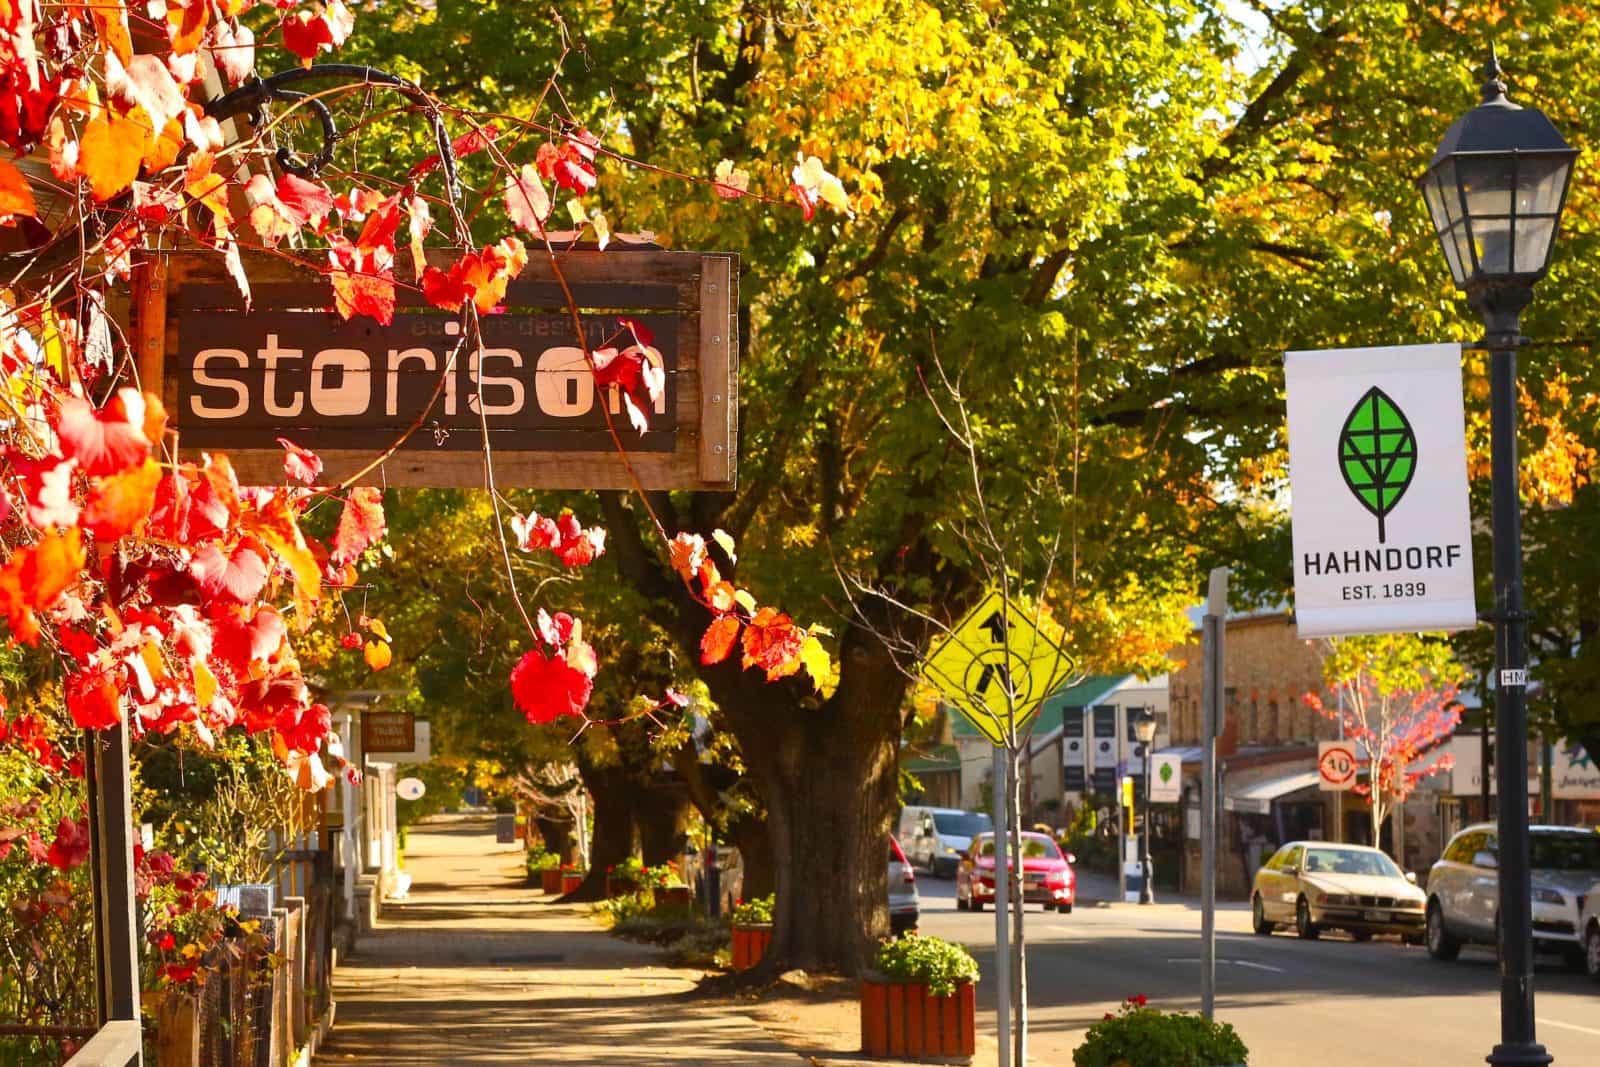 Footpath running alongside Hahndorf main street with signage, trees and autumn vines